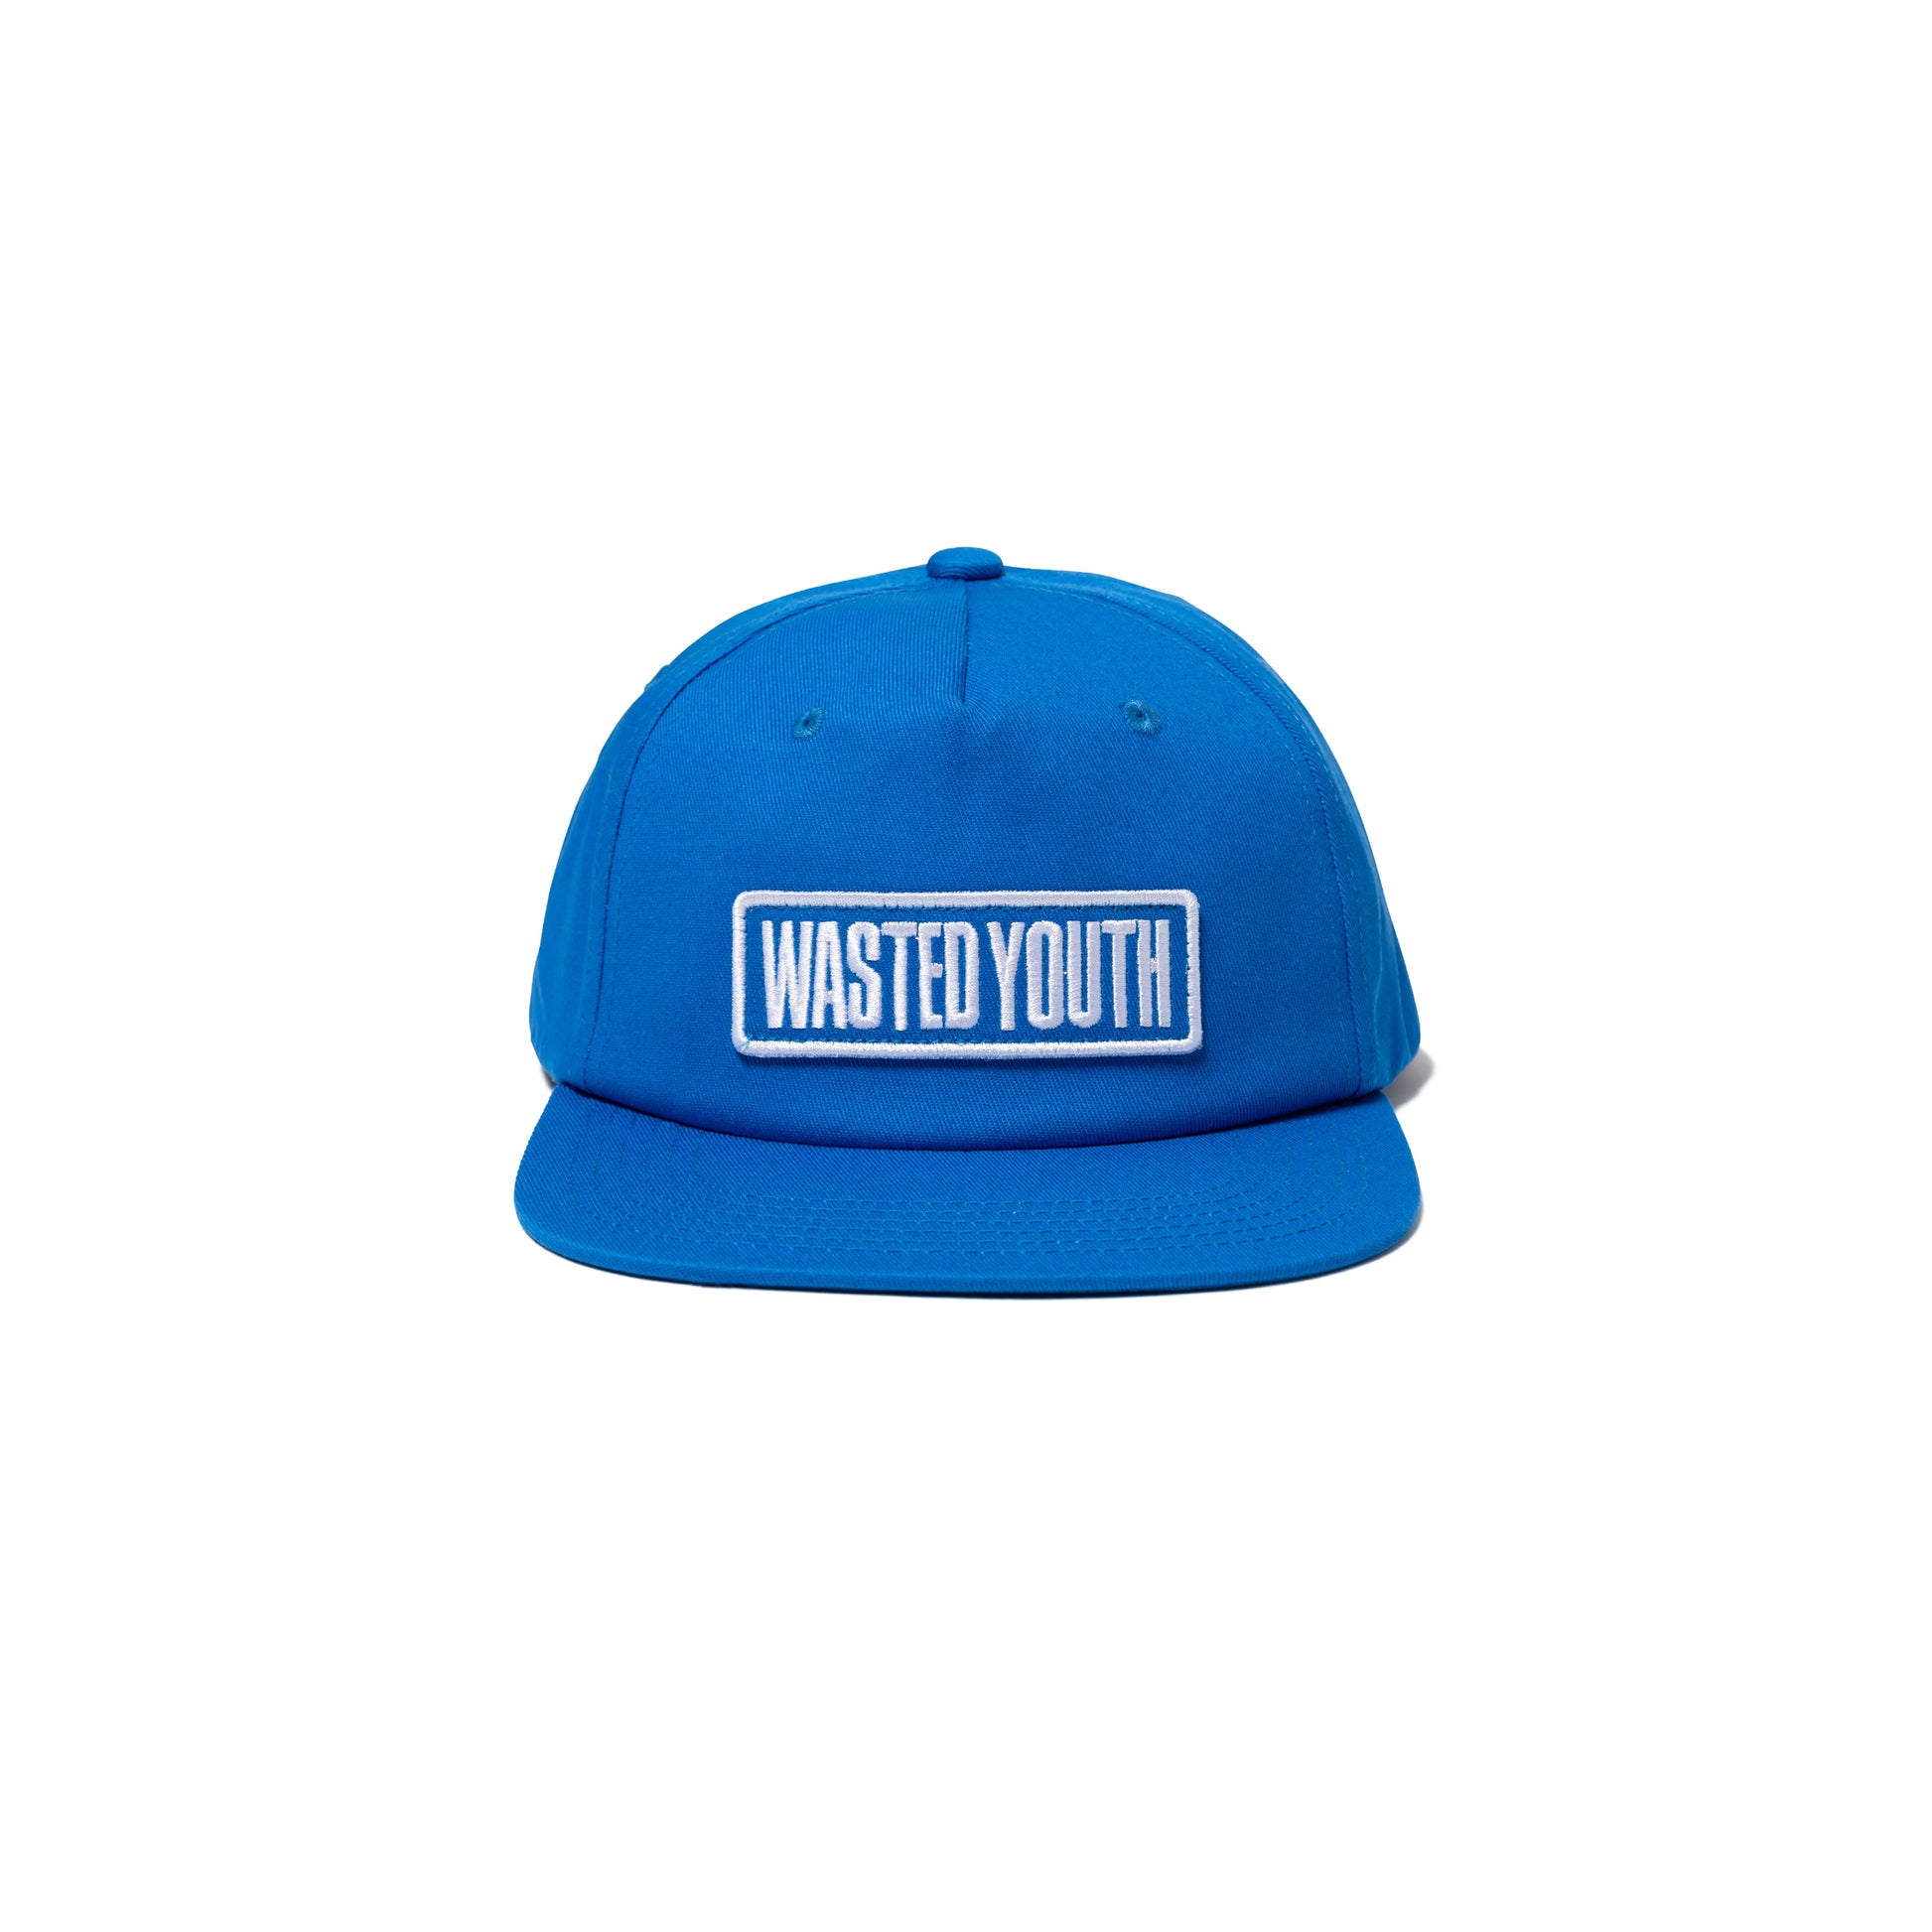 Wasted Youth 5 PANEL SNAPBACK CAP BL-C